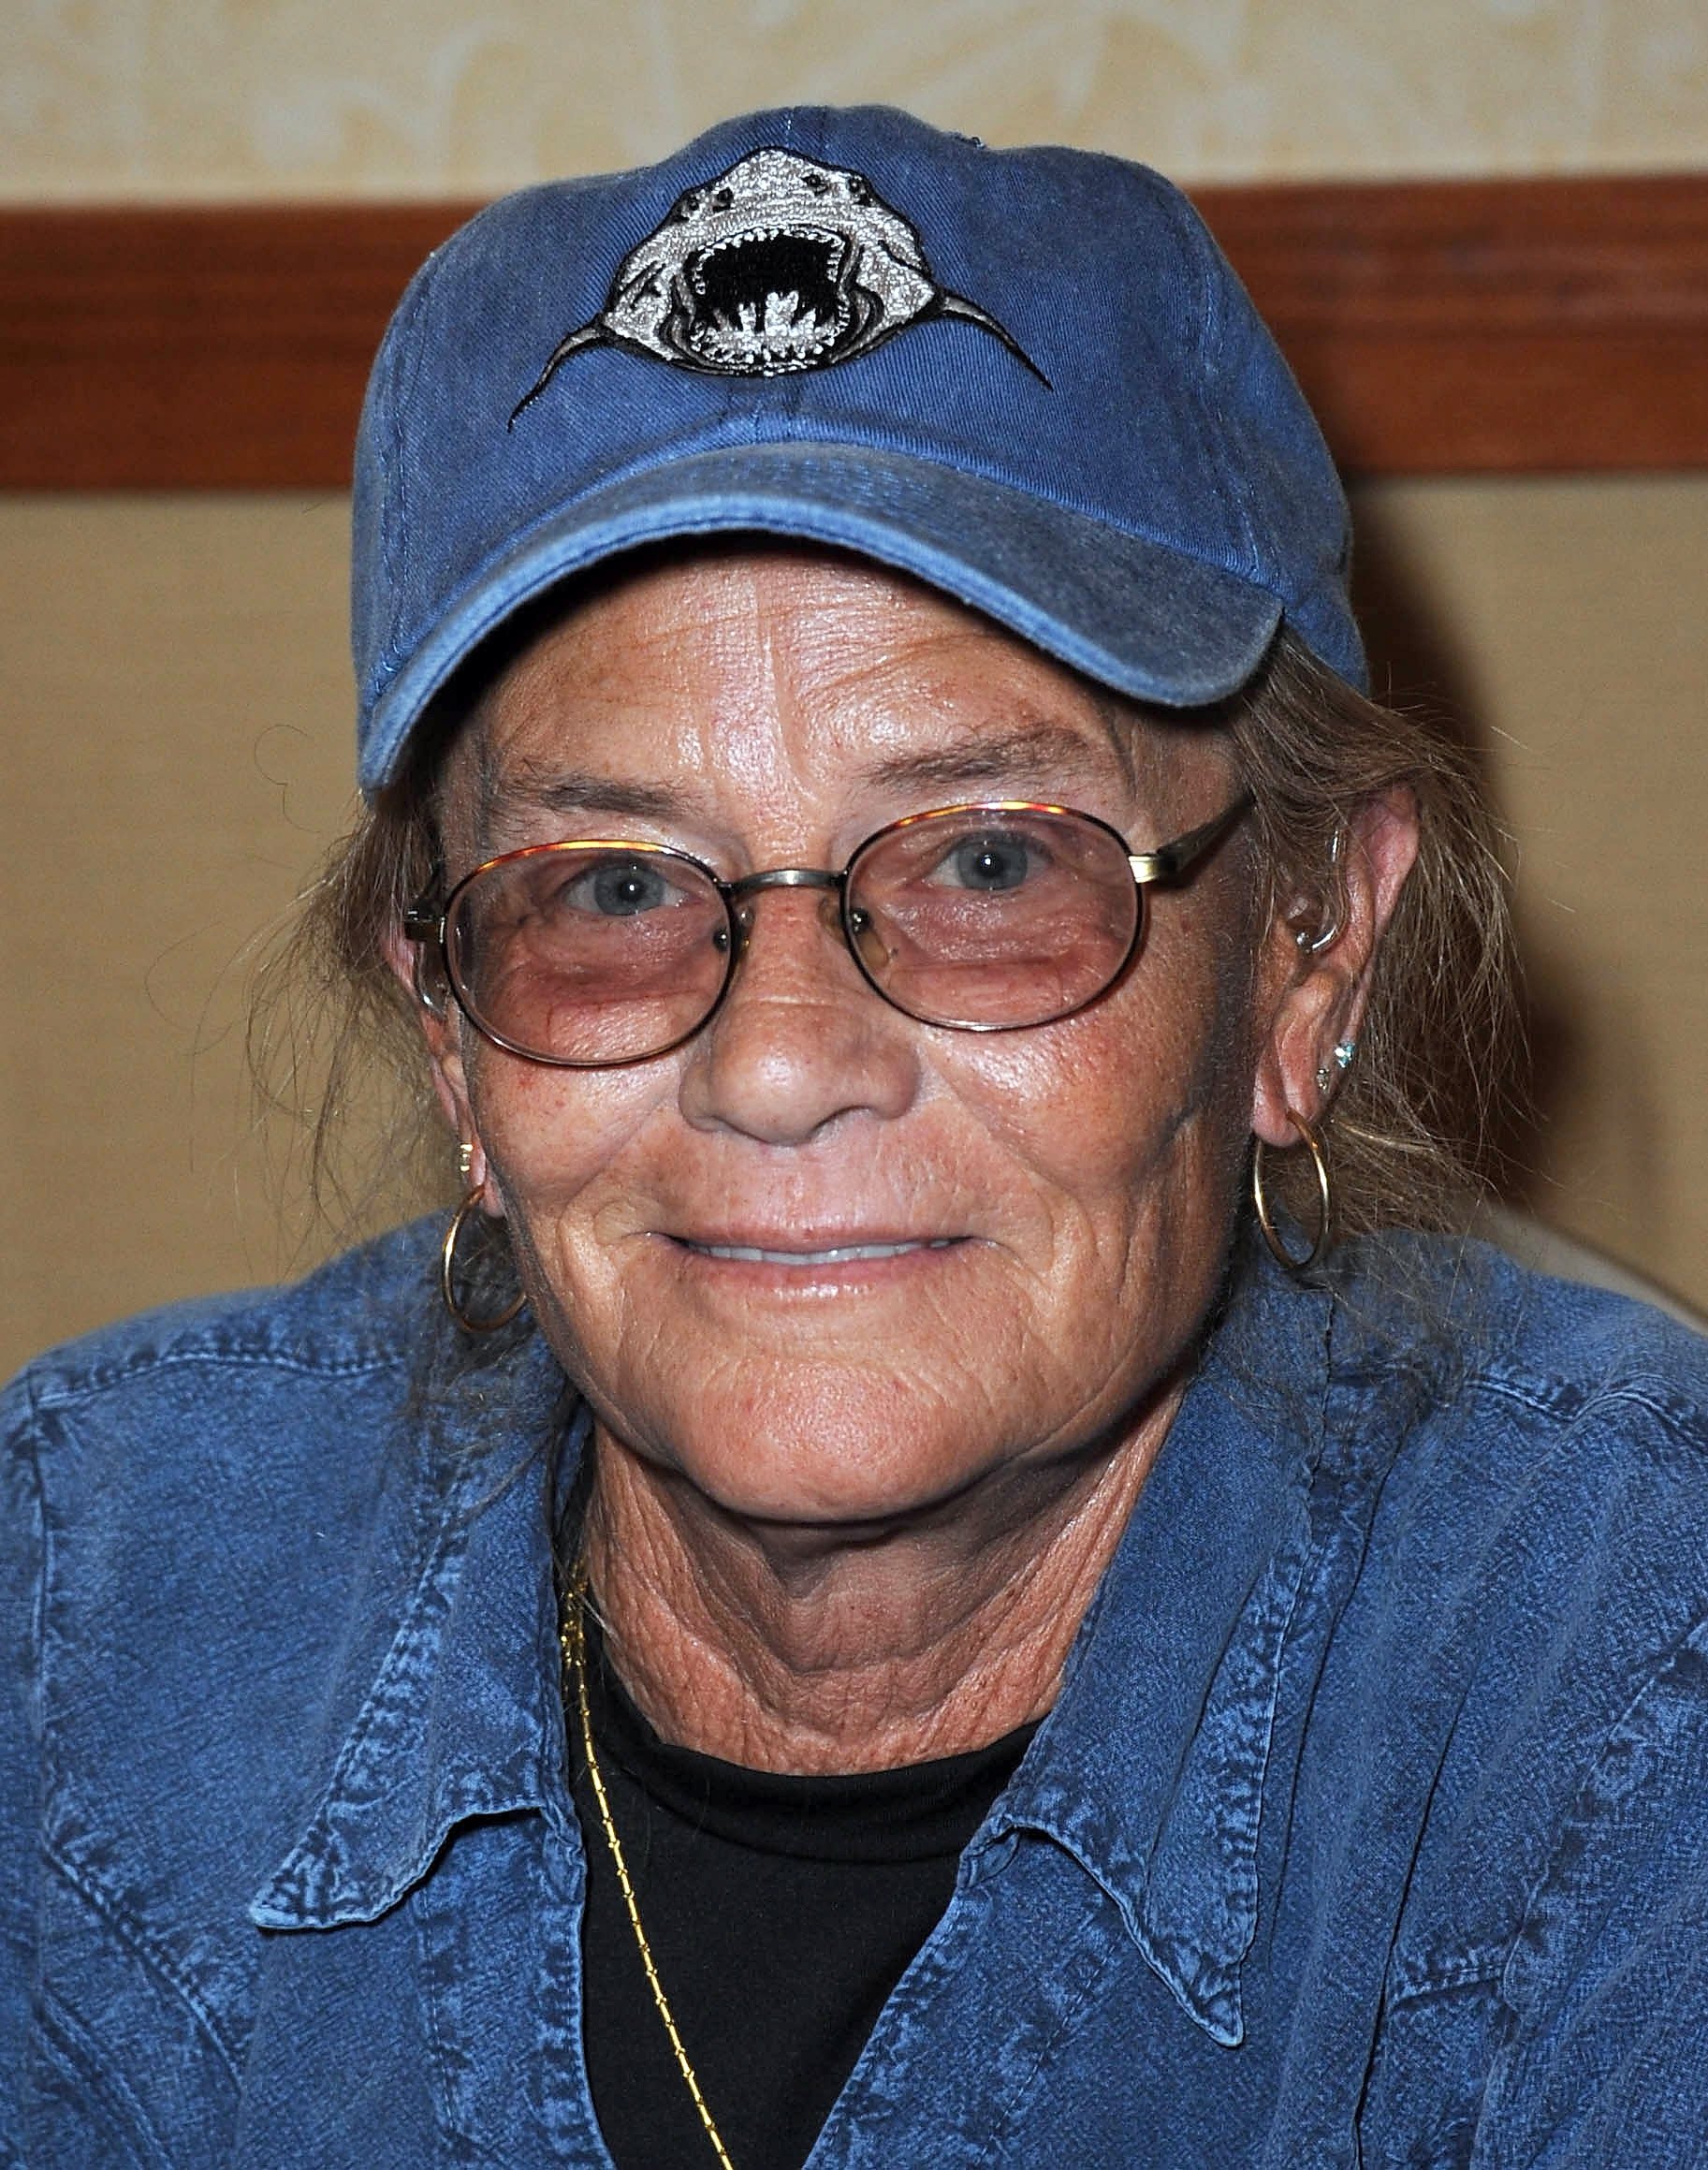 Susan Backlinie attends 2013 Monsterpalooza held at The Burbank Marriott Hotel & Convention Center on April 13, 2013 in Burbank, California | Source: Getty Images